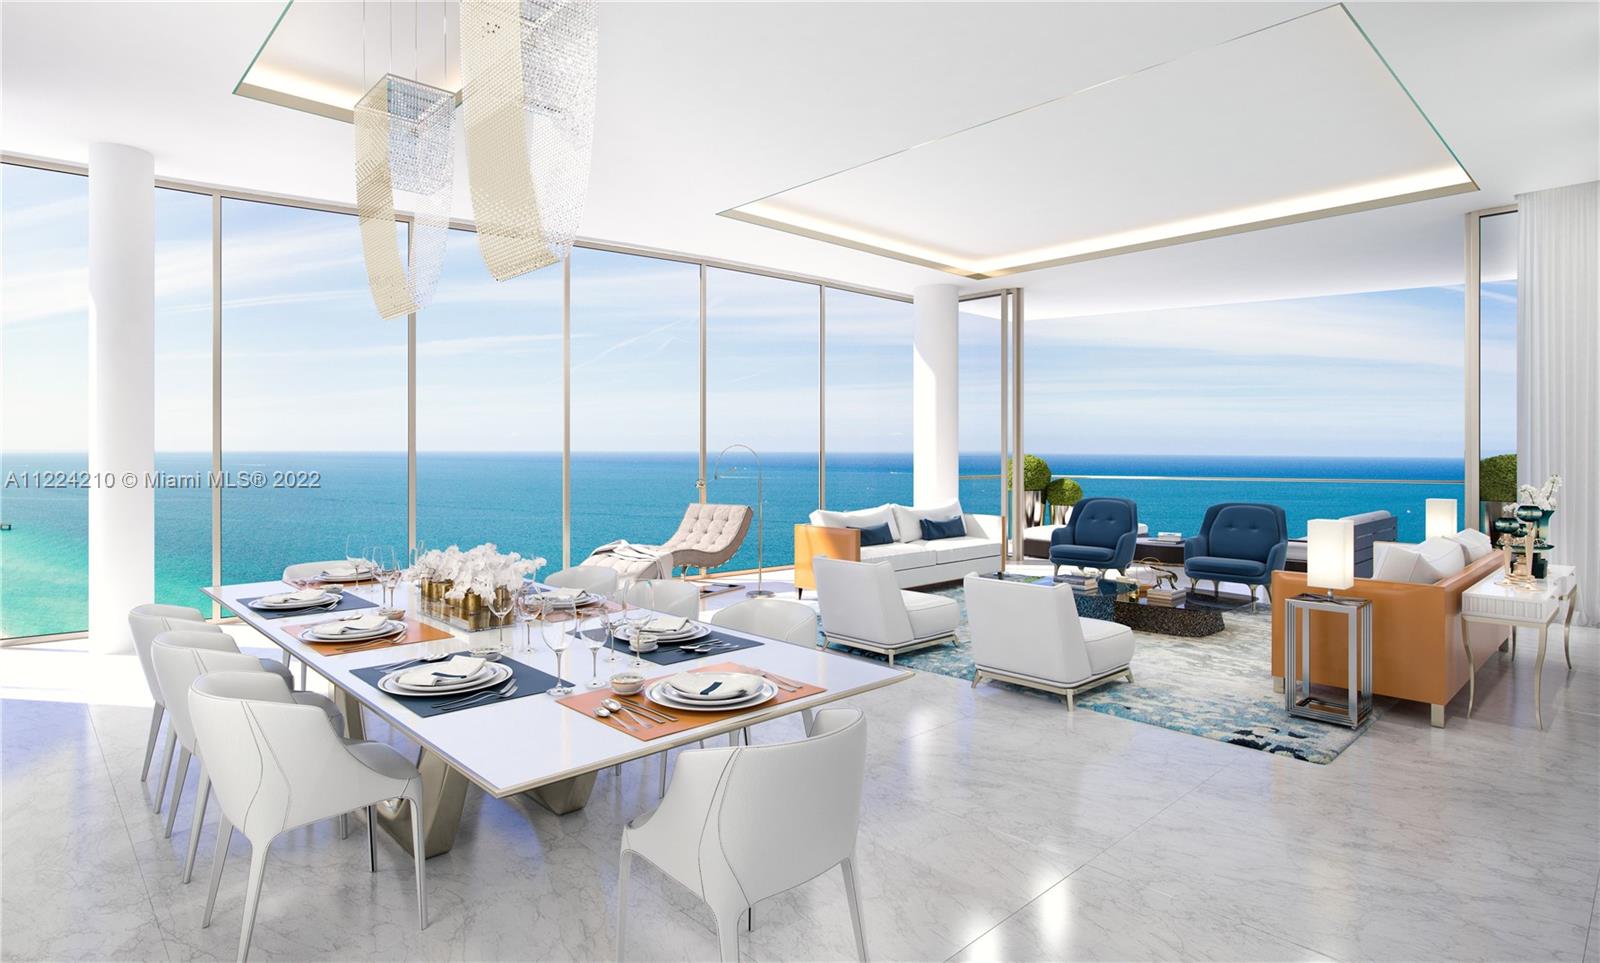 A spectacular, brand new corner residence in  the desirable Estates at Acqualina. This oceanfront five bedroom apartment is turnkey and ready to move in. Incredible finishes throughout, including marble floors, Molteni kitchen and closets and a La Cornue gas range. Over 45,000 sqft of amenities including an ice skating rink, bowling alley, movie theather, gym/spa and AVRA NY opening this fall.  Call to schedule a showing of this remarkable residence and be one of the first ones to call Estates home!